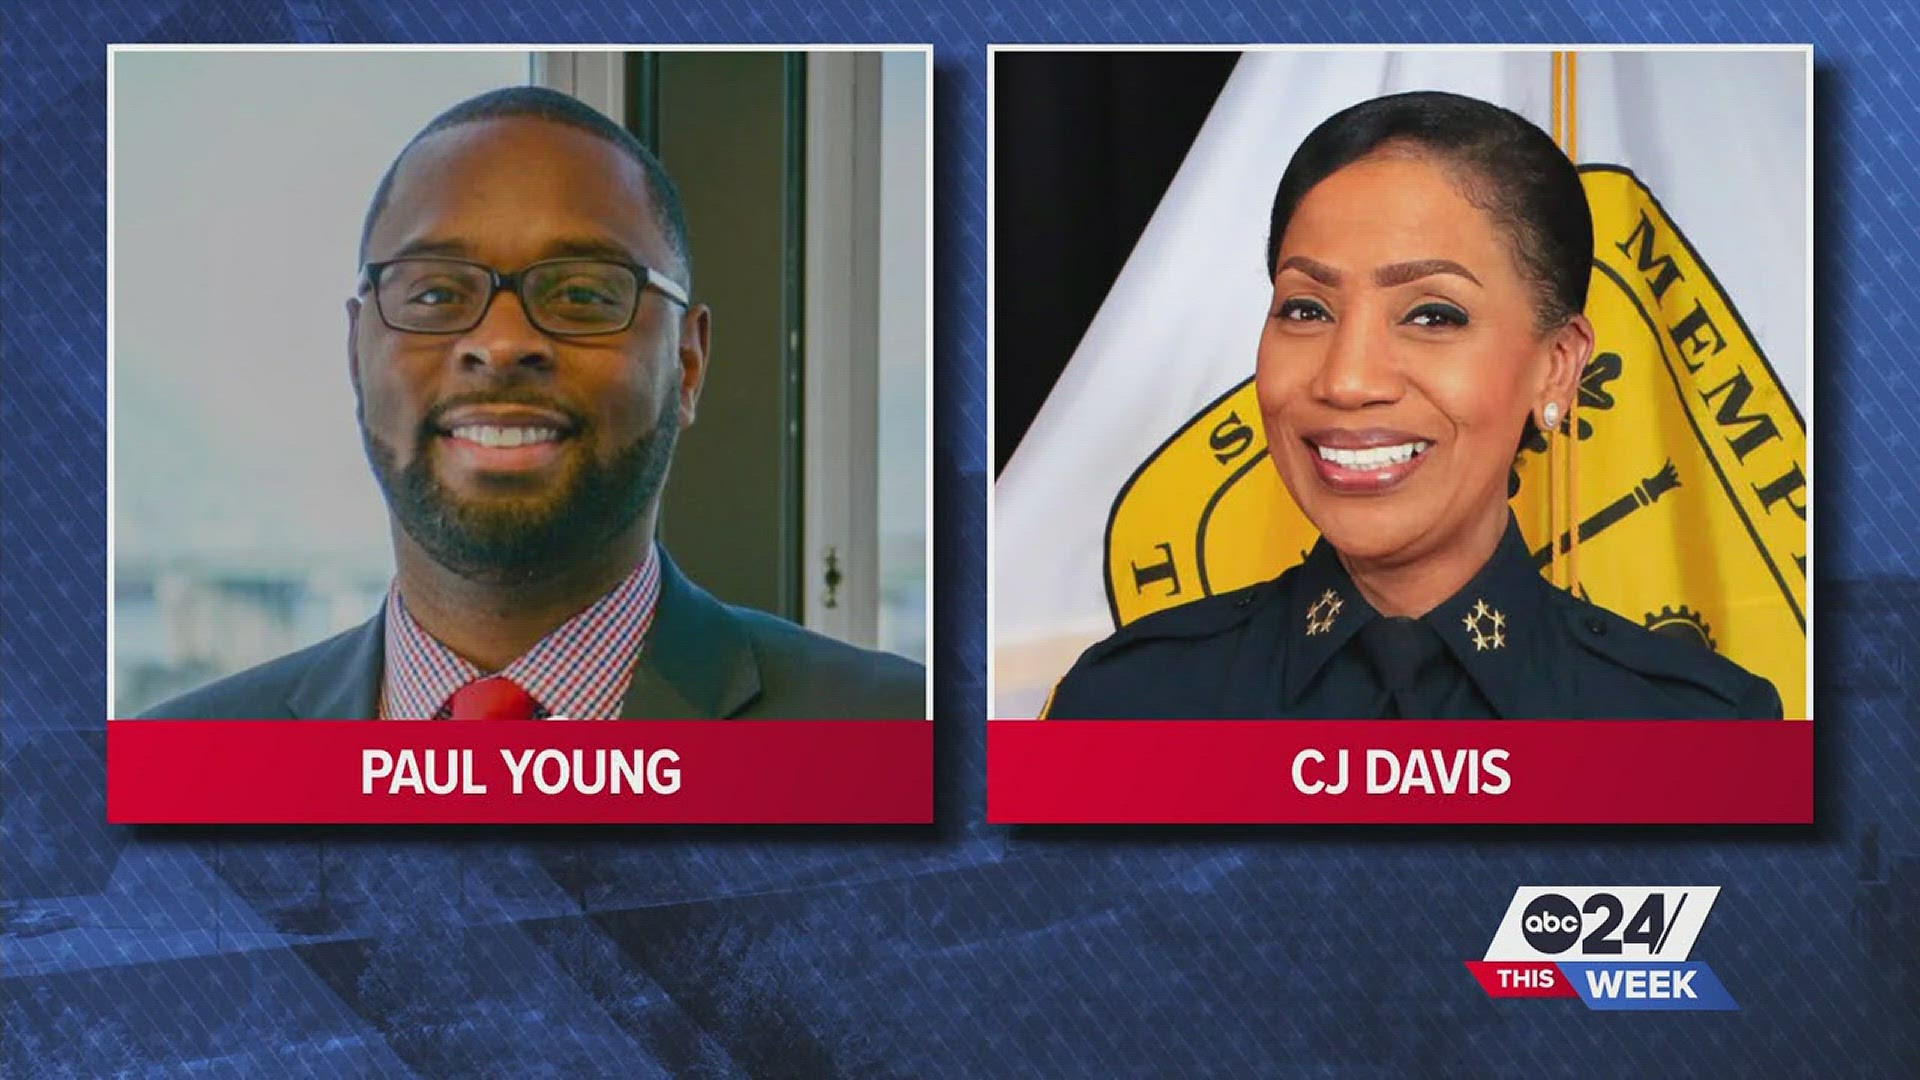 Mayor-elect Paul Young ended months of speculation by keeping Davis as chief after Memphis' record-breaking crime and controversy surrounding Tyre Nichols' death.